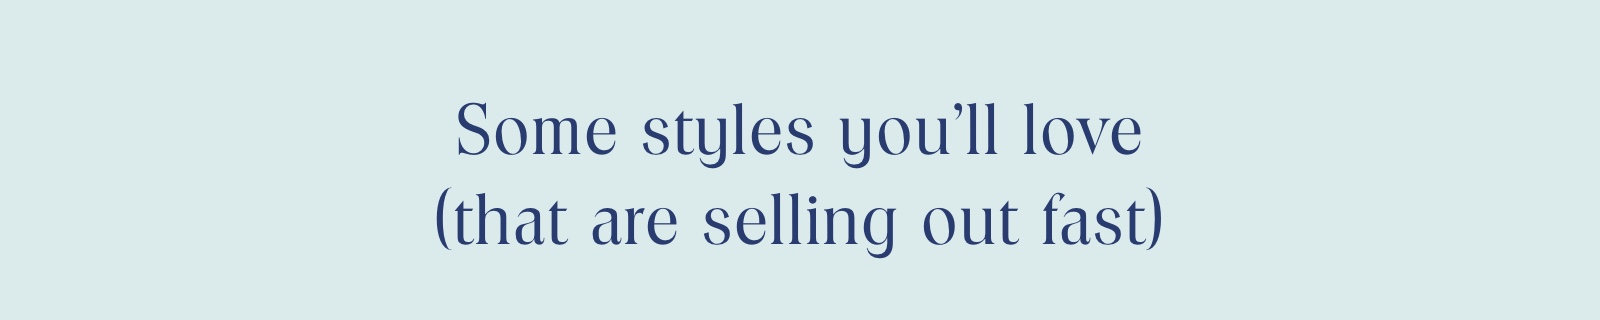 Some styles you'll love (that are selling out fast)